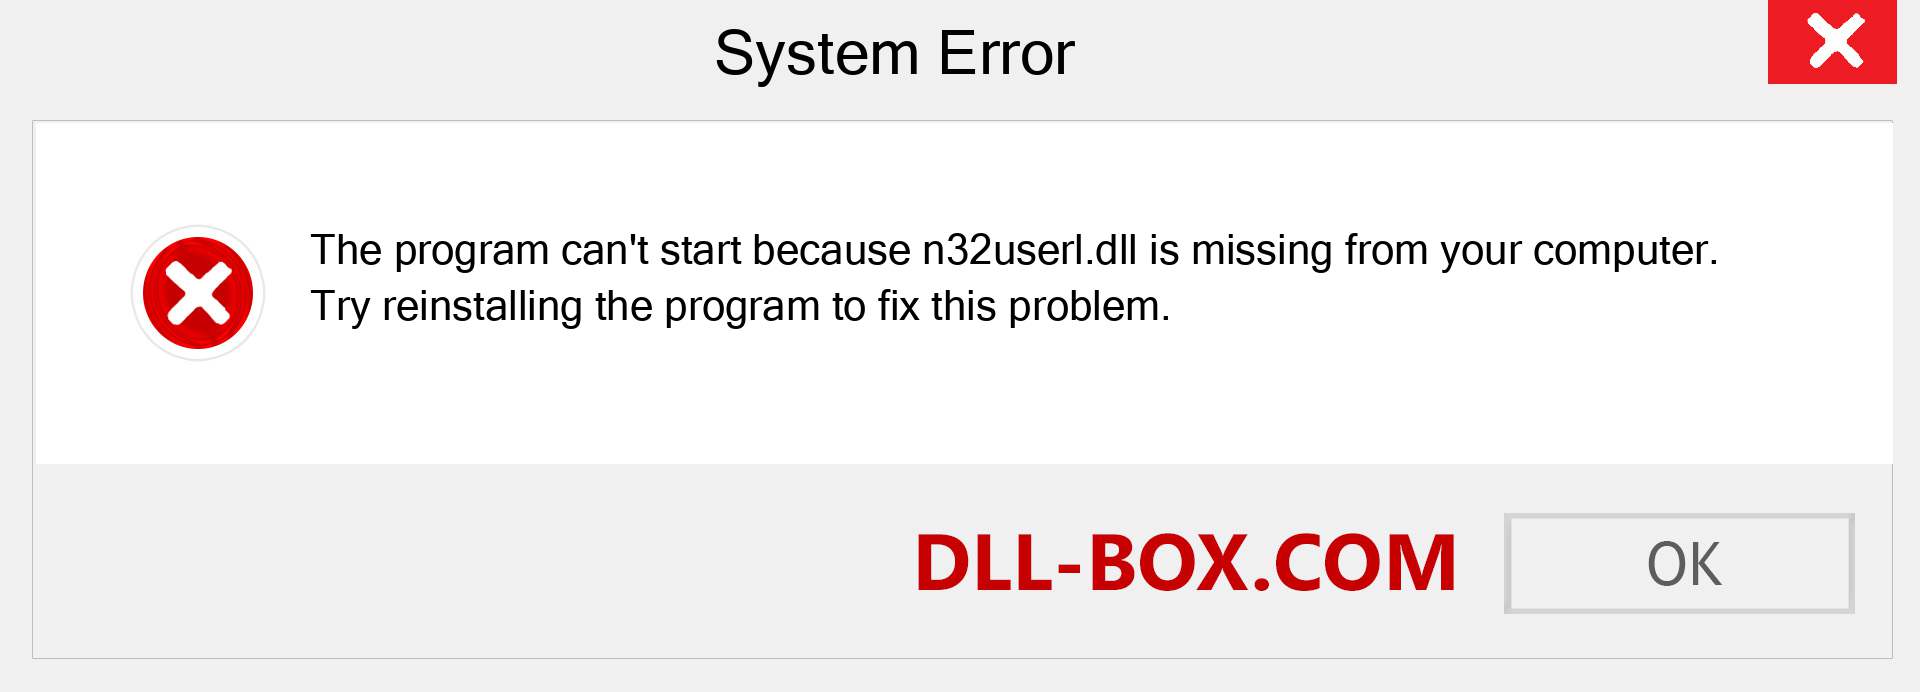  n32userl.dll file is missing?. Download for Windows 7, 8, 10 - Fix  n32userl dll Missing Error on Windows, photos, images